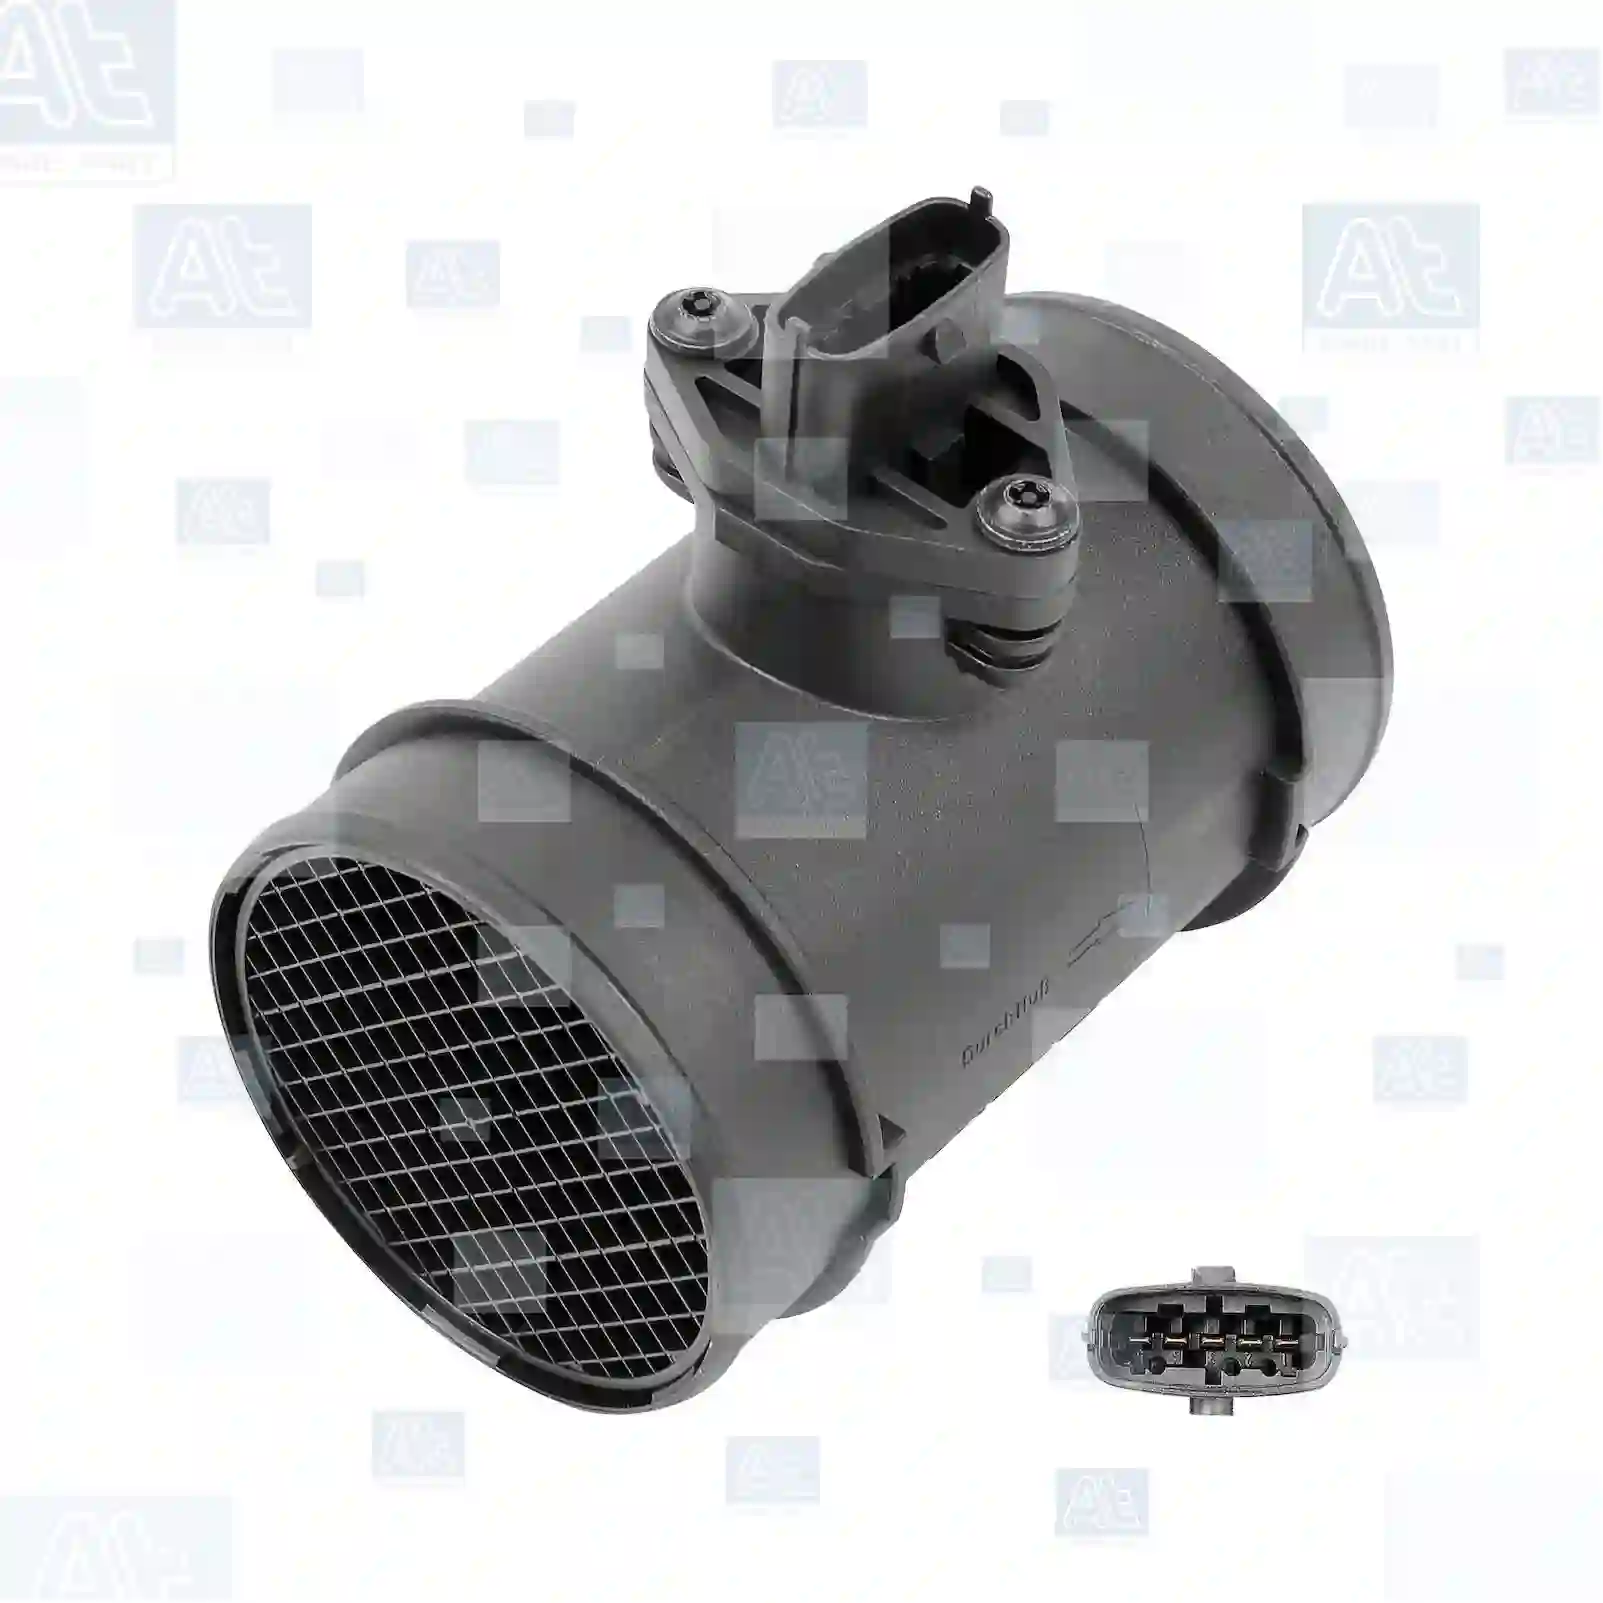 Air mass sensor, complete, at no 77706371, oem no: 1324369080, 13243690, 46444287, 46469917, 60663029, 60815616, 717359980, 90528435, 00001192W5, 1192W5, 1324369080, 171707, 46444287, 517745310, 60815616, 717359980, 1324369080, 13243690, 46444287, 517745310, 60815616, 717359980, 90528435, 9193533, 93171760, 90528435, 135098, 2505098, 836585, 836593, 16400-PDD-X00, 16400-PFT-E00, 28100-35400, 28100-39000, 500332364, 504051082, 28100-35400, 28100-39000, 1324369080, 13243690, 46444287, 60815616, 717359980, MHK100850, MHK101070, 836585, 836593, 00001192W5, 1192W5, AMR5707, MHK100850, MHK101070, ZUA000060SLP, 4662888, 5166541, 5167879, 90528435 At Spare Part | Engine, Accelerator Pedal, Camshaft, Connecting Rod, Crankcase, Crankshaft, Cylinder Head, Engine Suspension Mountings, Exhaust Manifold, Exhaust Gas Recirculation, Filter Kits, Flywheel Housing, General Overhaul Kits, Engine, Intake Manifold, Oil Cleaner, Oil Cooler, Oil Filter, Oil Pump, Oil Sump, Piston & Liner, Sensor & Switch, Timing Case, Turbocharger, Cooling System, Belt Tensioner, Coolant Filter, Coolant Pipe, Corrosion Prevention Agent, Drive, Expansion Tank, Fan, Intercooler, Monitors & Gauges, Radiator, Thermostat, V-Belt / Timing belt, Water Pump, Fuel System, Electronical Injector Unit, Feed Pump, Fuel Filter, cpl., Fuel Gauge Sender,  Fuel Line, Fuel Pump, Fuel Tank, Injection Line Kit, Injection Pump, Exhaust System, Clutch & Pedal, Gearbox, Propeller Shaft, Axles, Brake System, Hubs & Wheels, Suspension, Leaf Spring, Universal Parts / Accessories, Steering, Electrical System, Cabin Air mass sensor, complete, at no 77706371, oem no: 1324369080, 13243690, 46444287, 46469917, 60663029, 60815616, 717359980, 90528435, 00001192W5, 1192W5, 1324369080, 171707, 46444287, 517745310, 60815616, 717359980, 1324369080, 13243690, 46444287, 517745310, 60815616, 717359980, 90528435, 9193533, 93171760, 90528435, 135098, 2505098, 836585, 836593, 16400-PDD-X00, 16400-PFT-E00, 28100-35400, 28100-39000, 500332364, 504051082, 28100-35400, 28100-39000, 1324369080, 13243690, 46444287, 60815616, 717359980, MHK100850, MHK101070, 836585, 836593, 00001192W5, 1192W5, AMR5707, MHK100850, MHK101070, ZUA000060SLP, 4662888, 5166541, 5167879, 90528435 At Spare Part | Engine, Accelerator Pedal, Camshaft, Connecting Rod, Crankcase, Crankshaft, Cylinder Head, Engine Suspension Mountings, Exhaust Manifold, Exhaust Gas Recirculation, Filter Kits, Flywheel Housing, General Overhaul Kits, Engine, Intake Manifold, Oil Cleaner, Oil Cooler, Oil Filter, Oil Pump, Oil Sump, Piston & Liner, Sensor & Switch, Timing Case, Turbocharger, Cooling System, Belt Tensioner, Coolant Filter, Coolant Pipe, Corrosion Prevention Agent, Drive, Expansion Tank, Fan, Intercooler, Monitors & Gauges, Radiator, Thermostat, V-Belt / Timing belt, Water Pump, Fuel System, Electronical Injector Unit, Feed Pump, Fuel Filter, cpl., Fuel Gauge Sender,  Fuel Line, Fuel Pump, Fuel Tank, Injection Line Kit, Injection Pump, Exhaust System, Clutch & Pedal, Gearbox, Propeller Shaft, Axles, Brake System, Hubs & Wheels, Suspension, Leaf Spring, Universal Parts / Accessories, Steering, Electrical System, Cabin